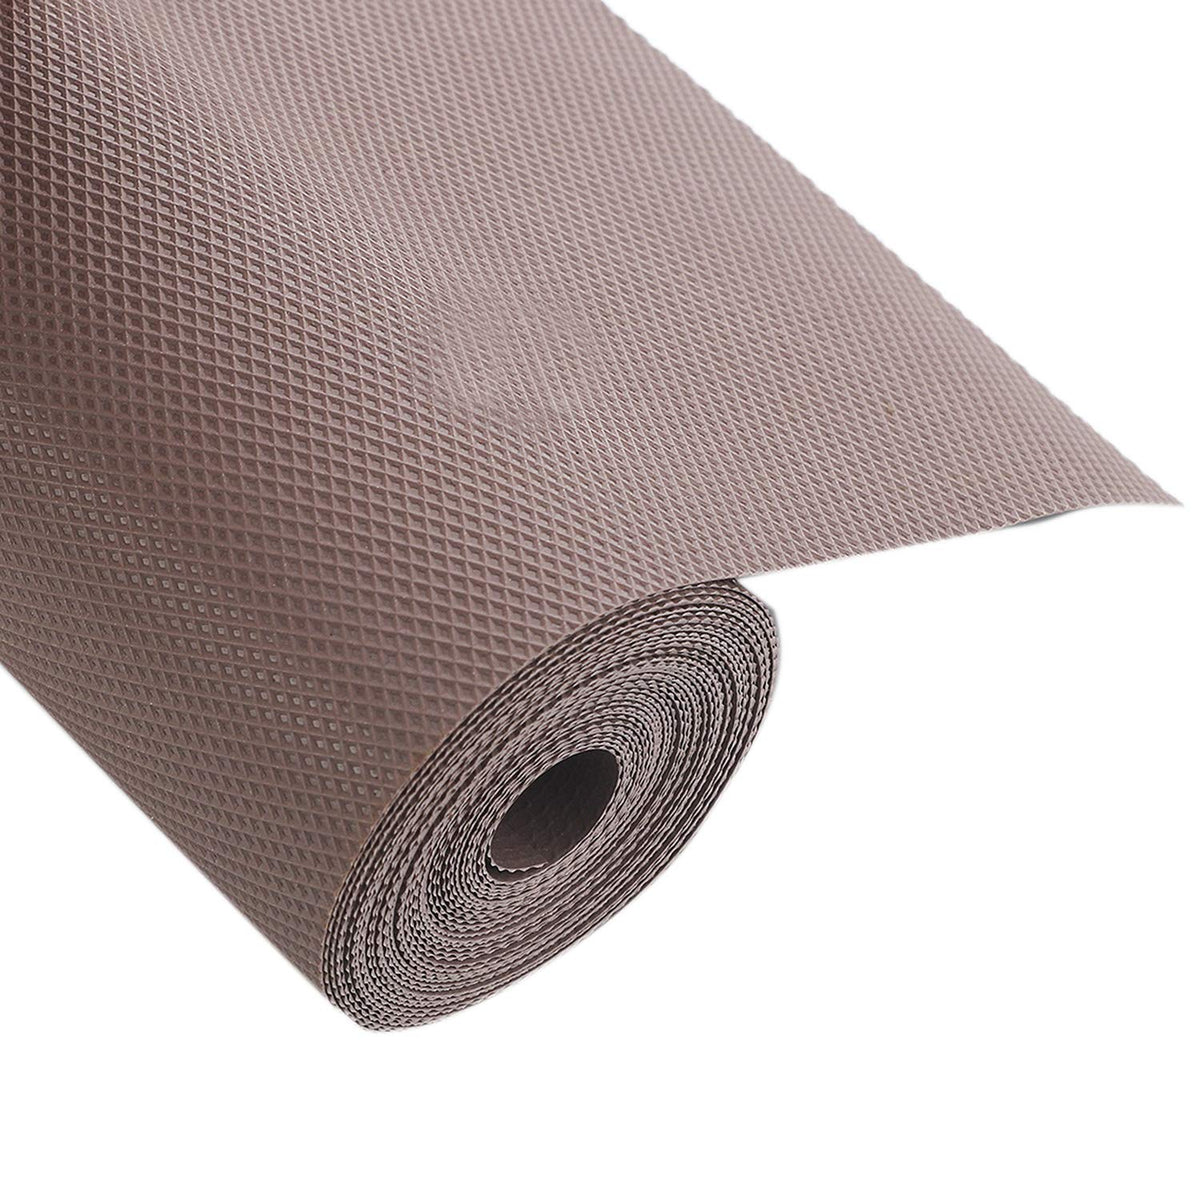 Kuber Industries Multipurpose Textured Super Strong Anti-Anti Skid Mats and Liners for Drawer, Refrigerator, Cupboard, Shelf, Cabinet, Wardrobe, Fridge and Dining - Size 45X500cm (5 Meter Roll, Brown)